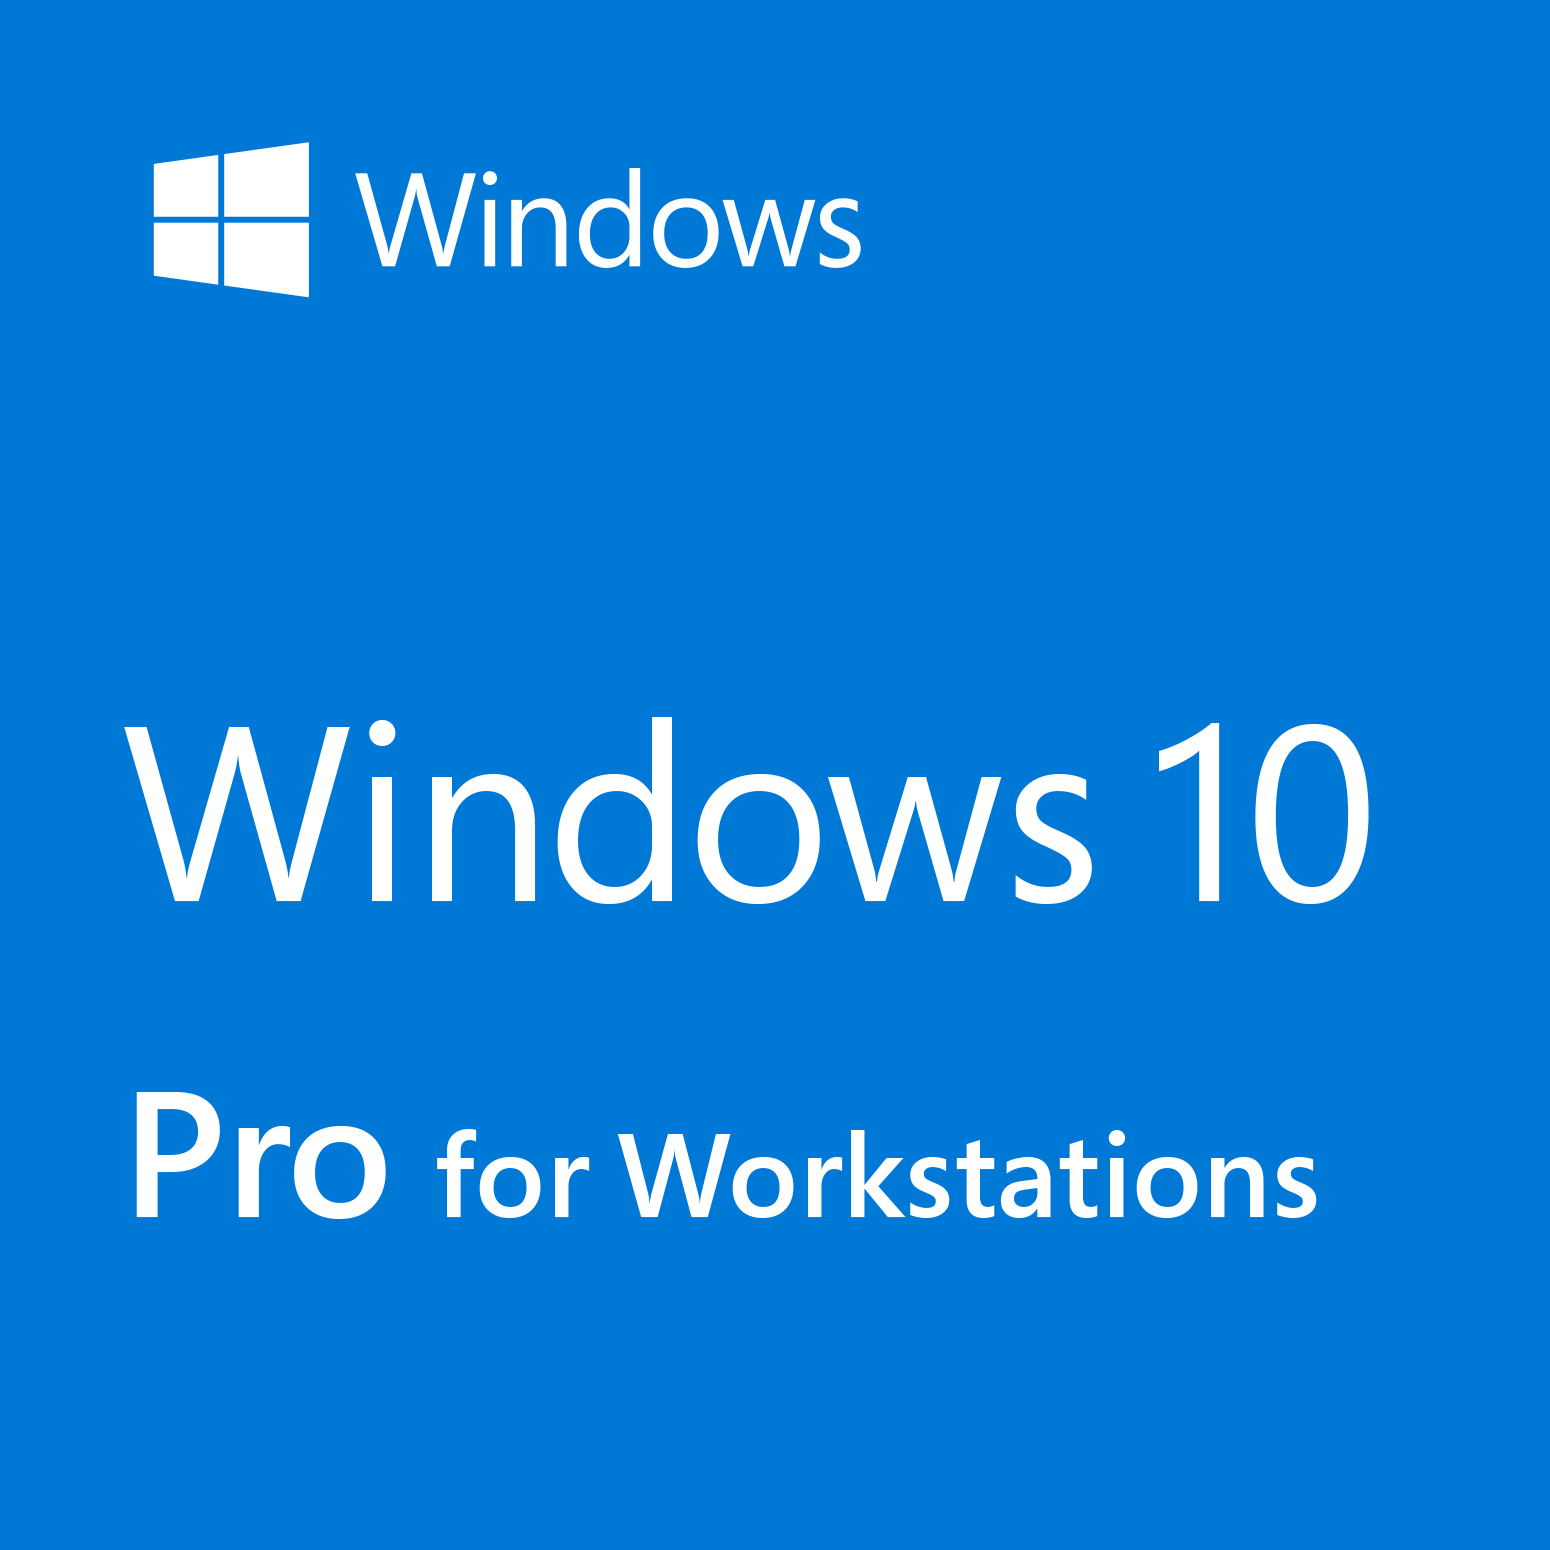 }CN\tgWindows 10 Pro for Workstations43052~